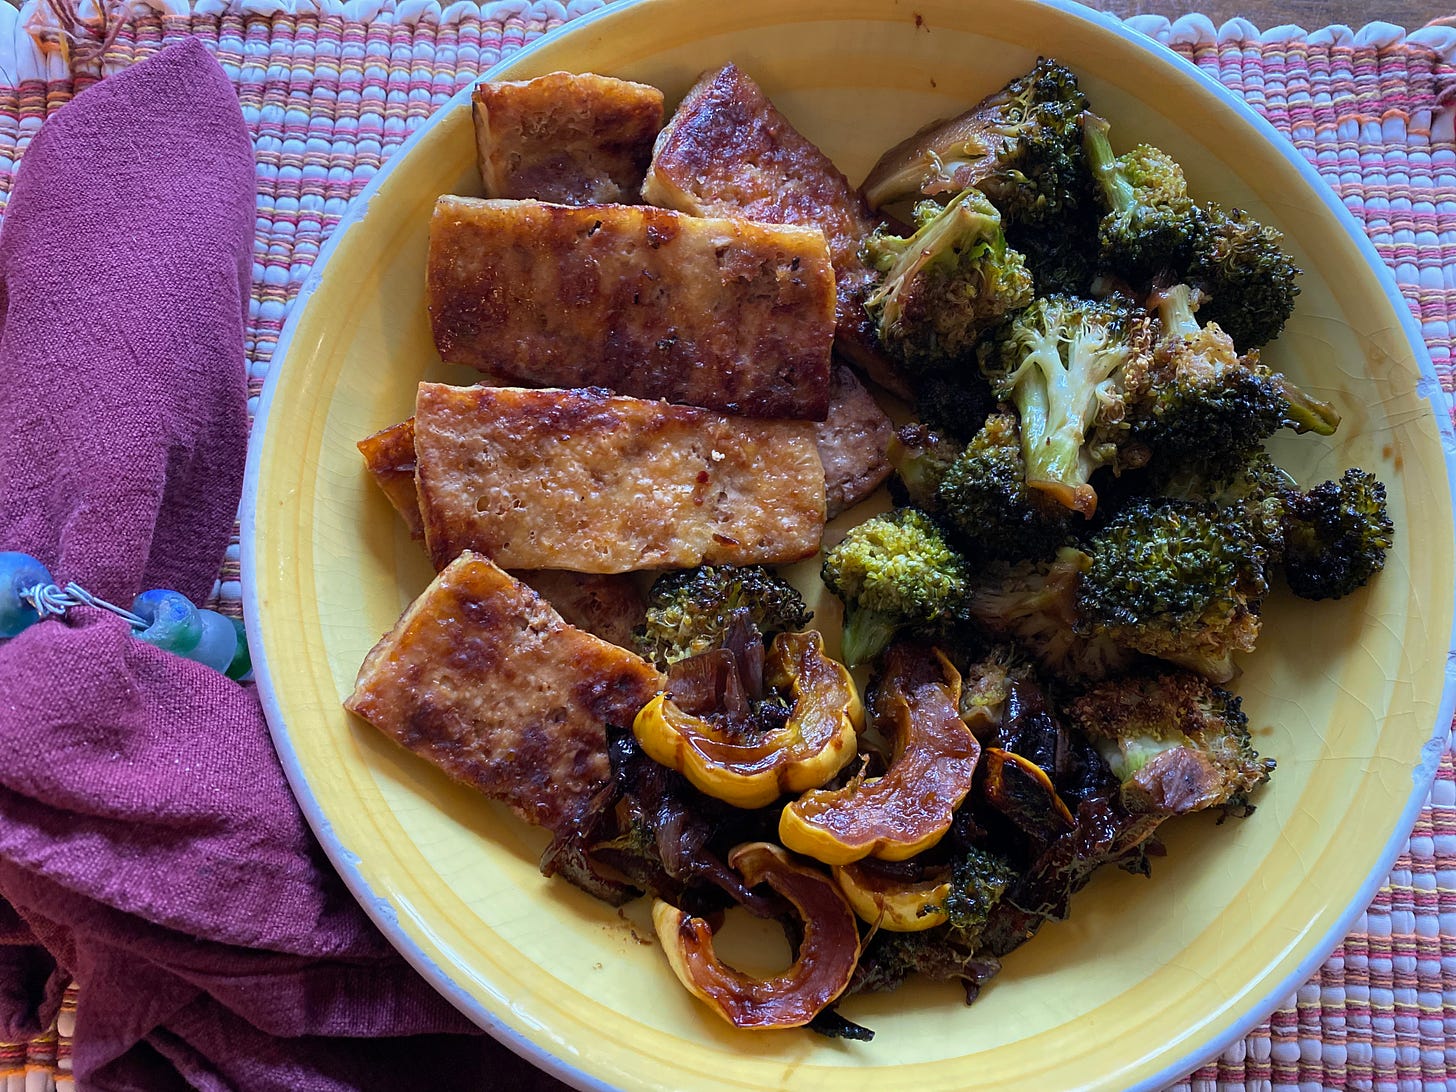 A wide yellow bowl of crispy, browned tofu, slices of roasted delicata squash, and roasted broccoli sits on a checked placemat next to a napkins.